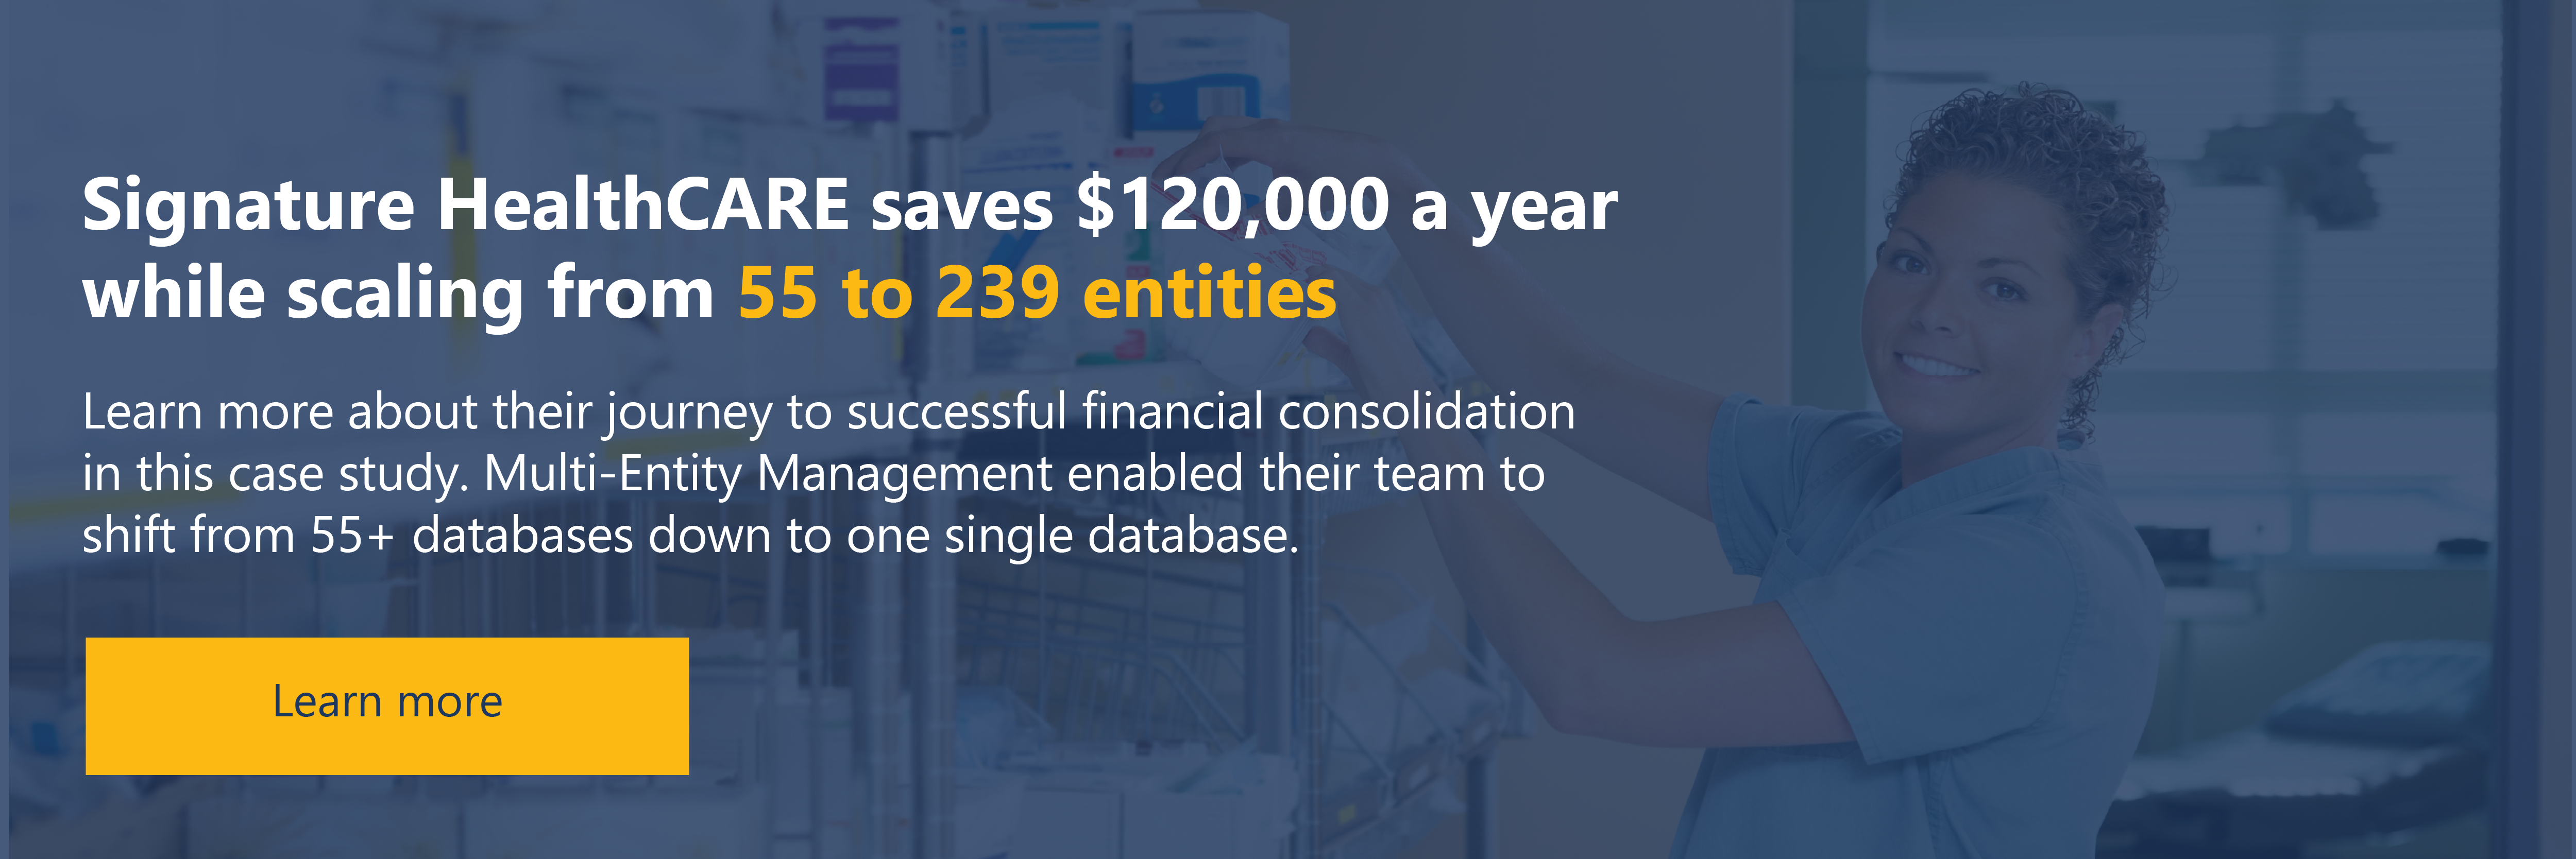 Signature HealthCARE saves $120,000 a year while scaling from 55 to 239 entities